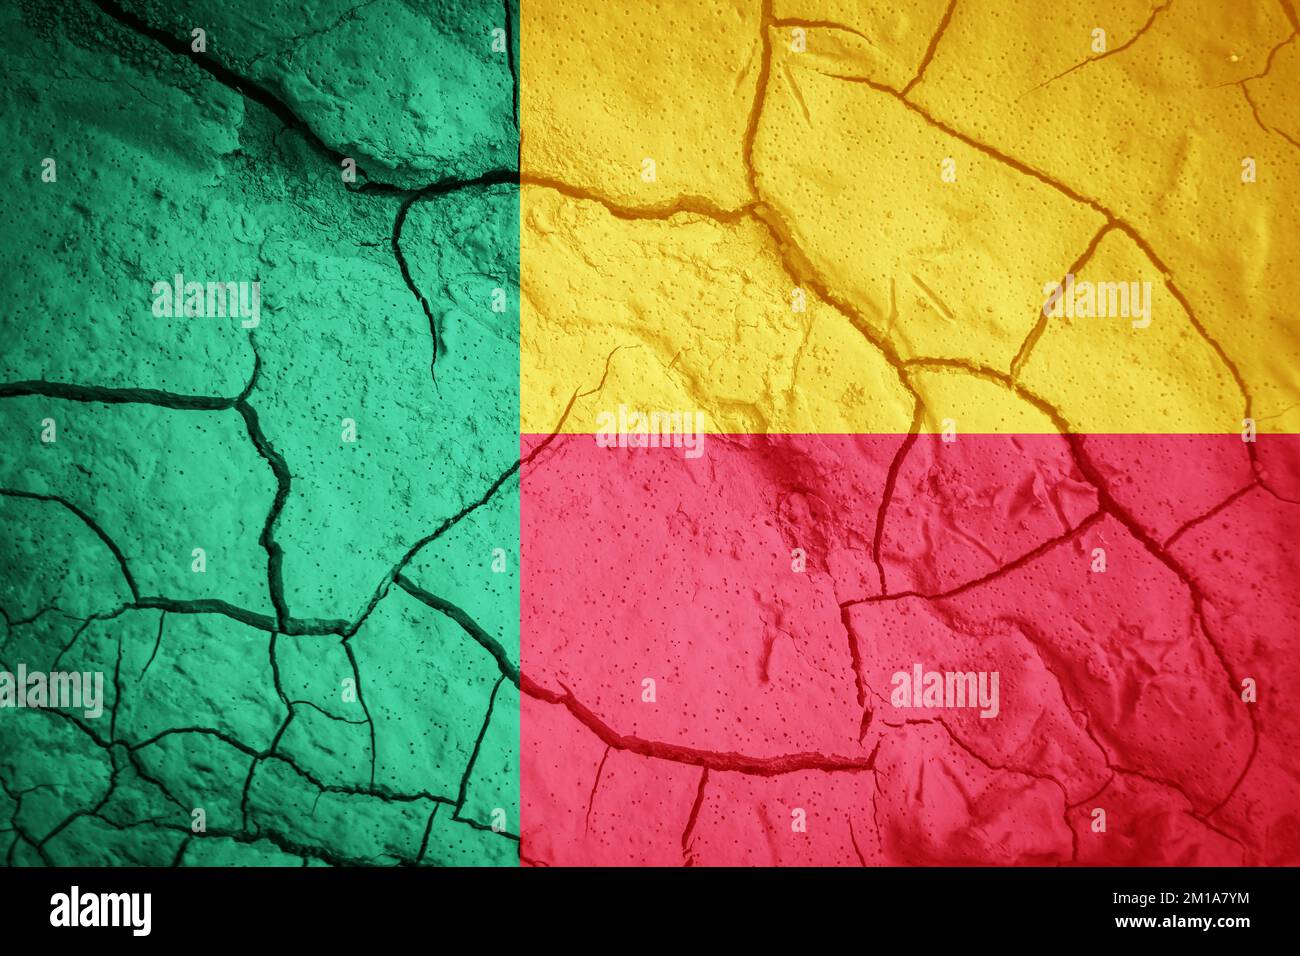 Flag of Benin. Benin symbol. Flag on the background of dry cracked earth. Benin flag with drought concept Stock Photo